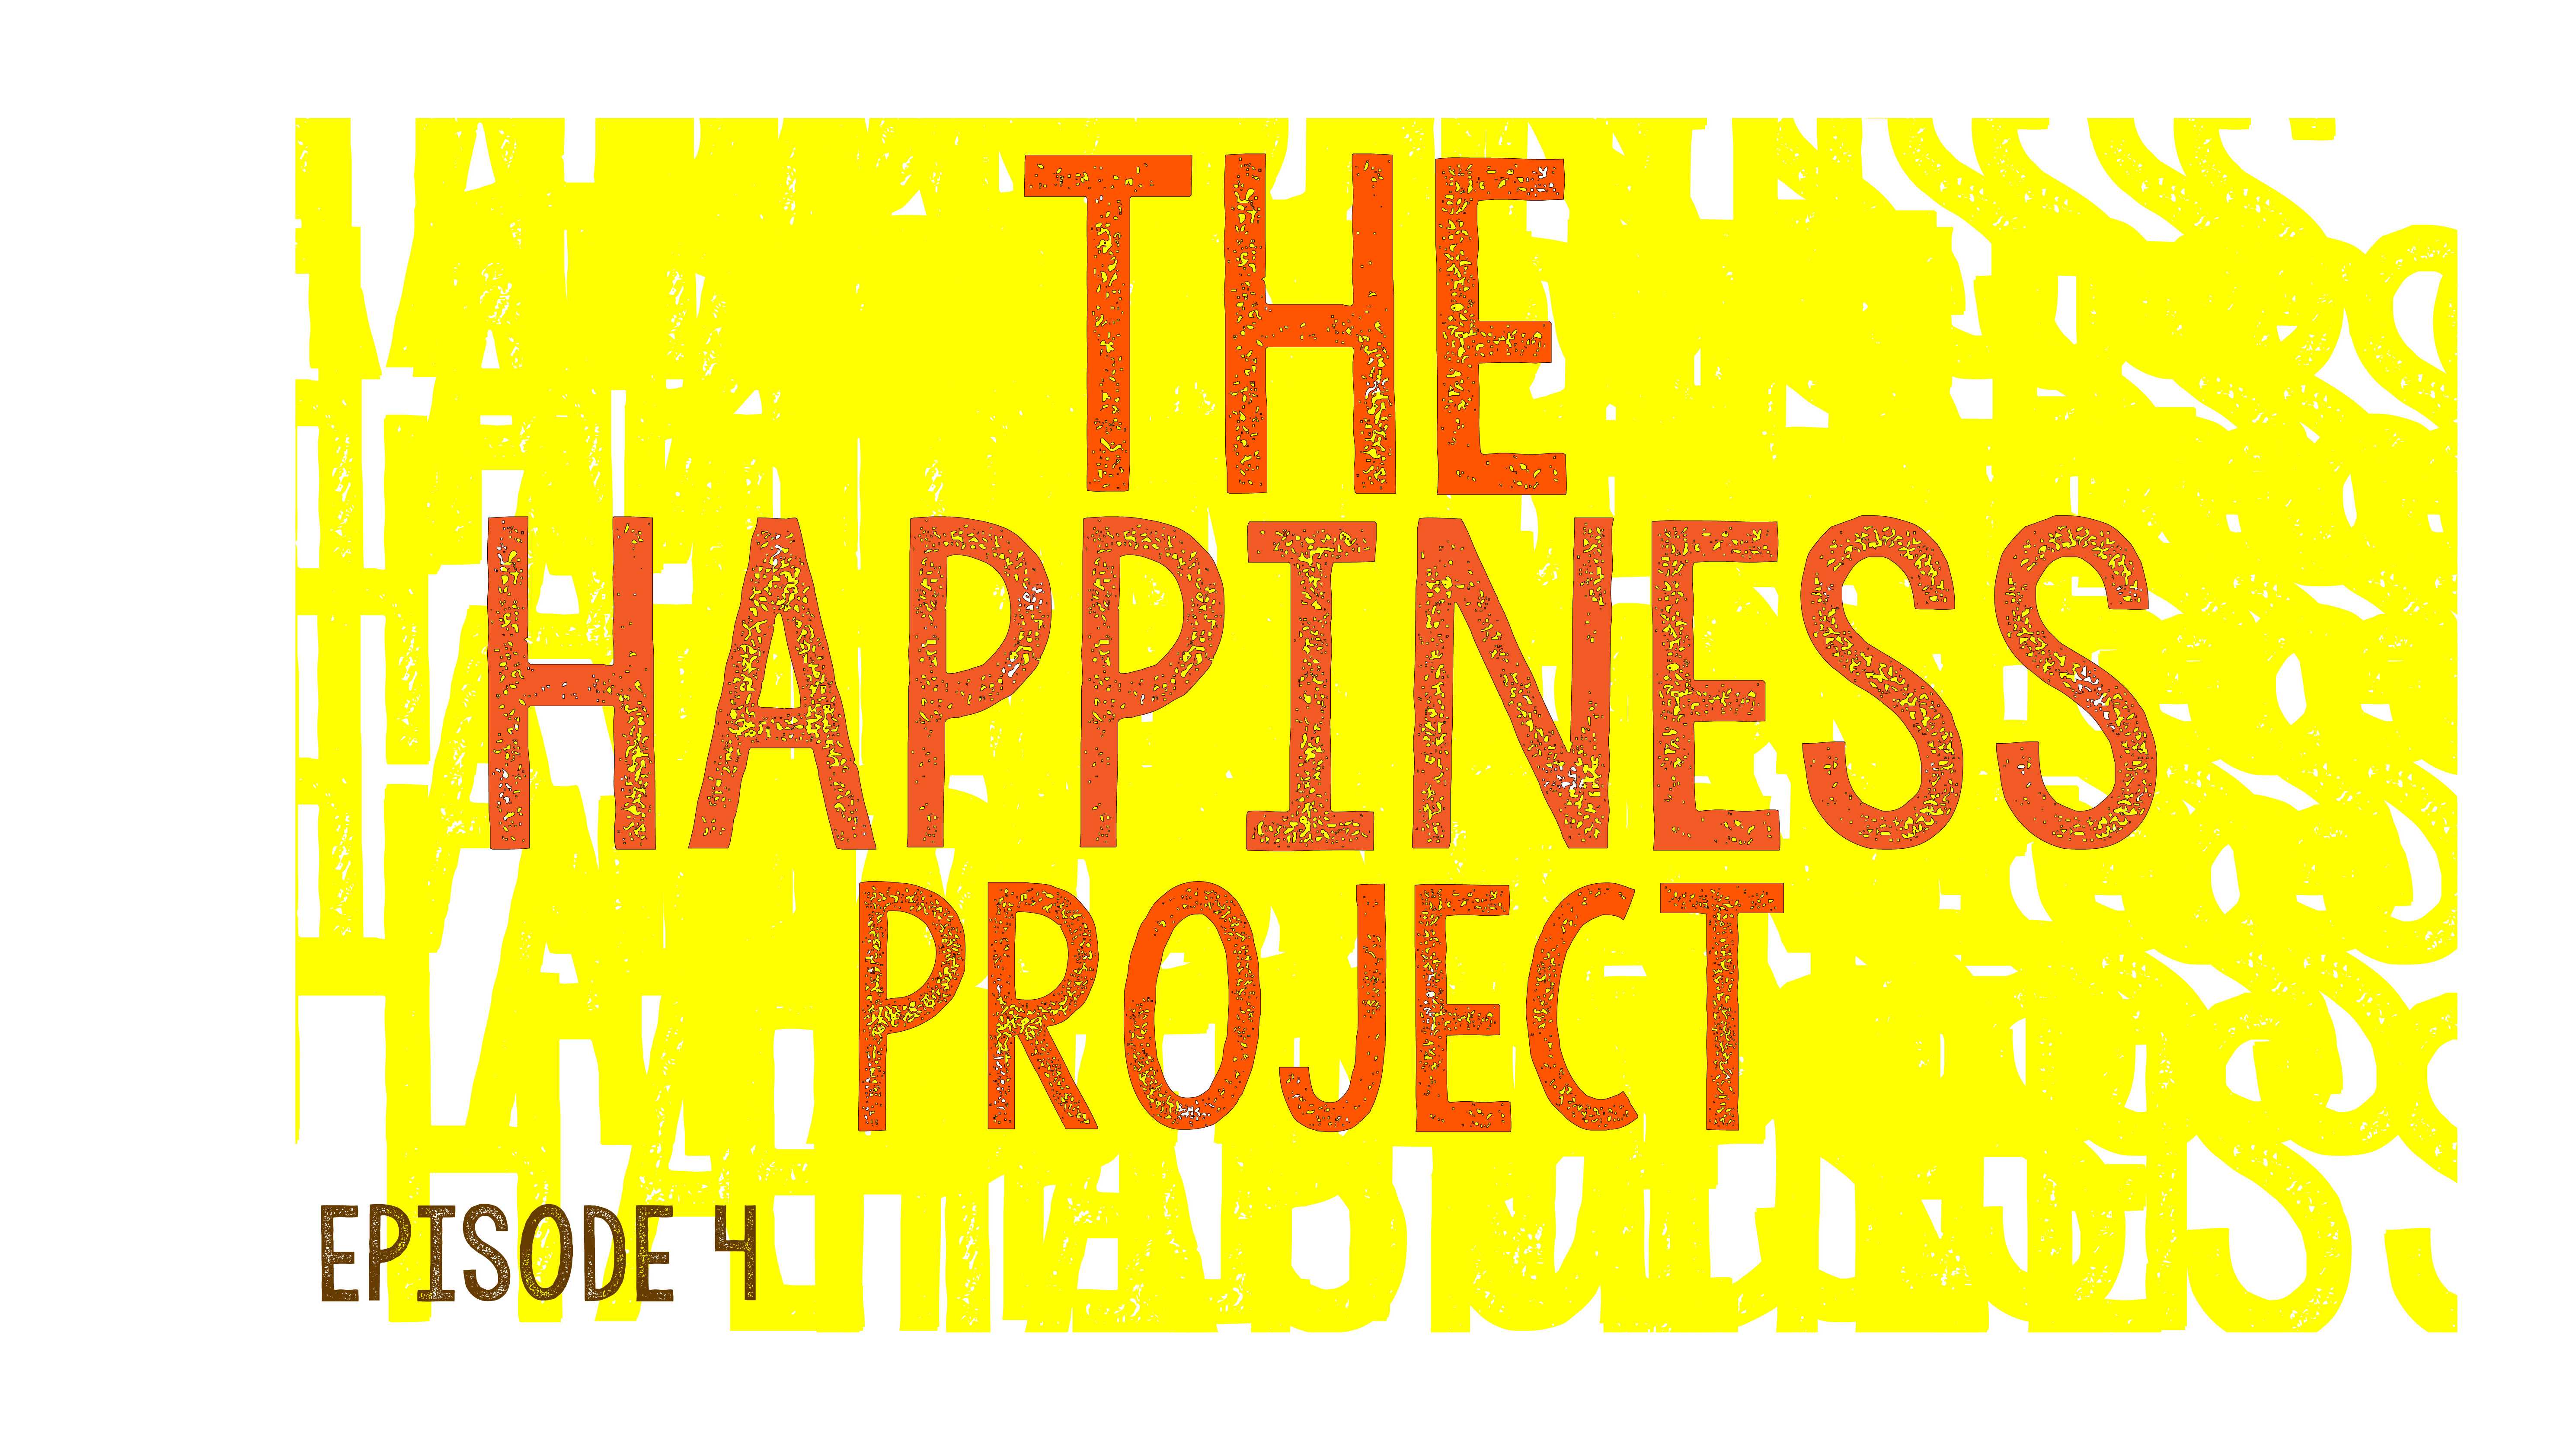 The Happiness Project: Who is a musical artist that makes you happy?